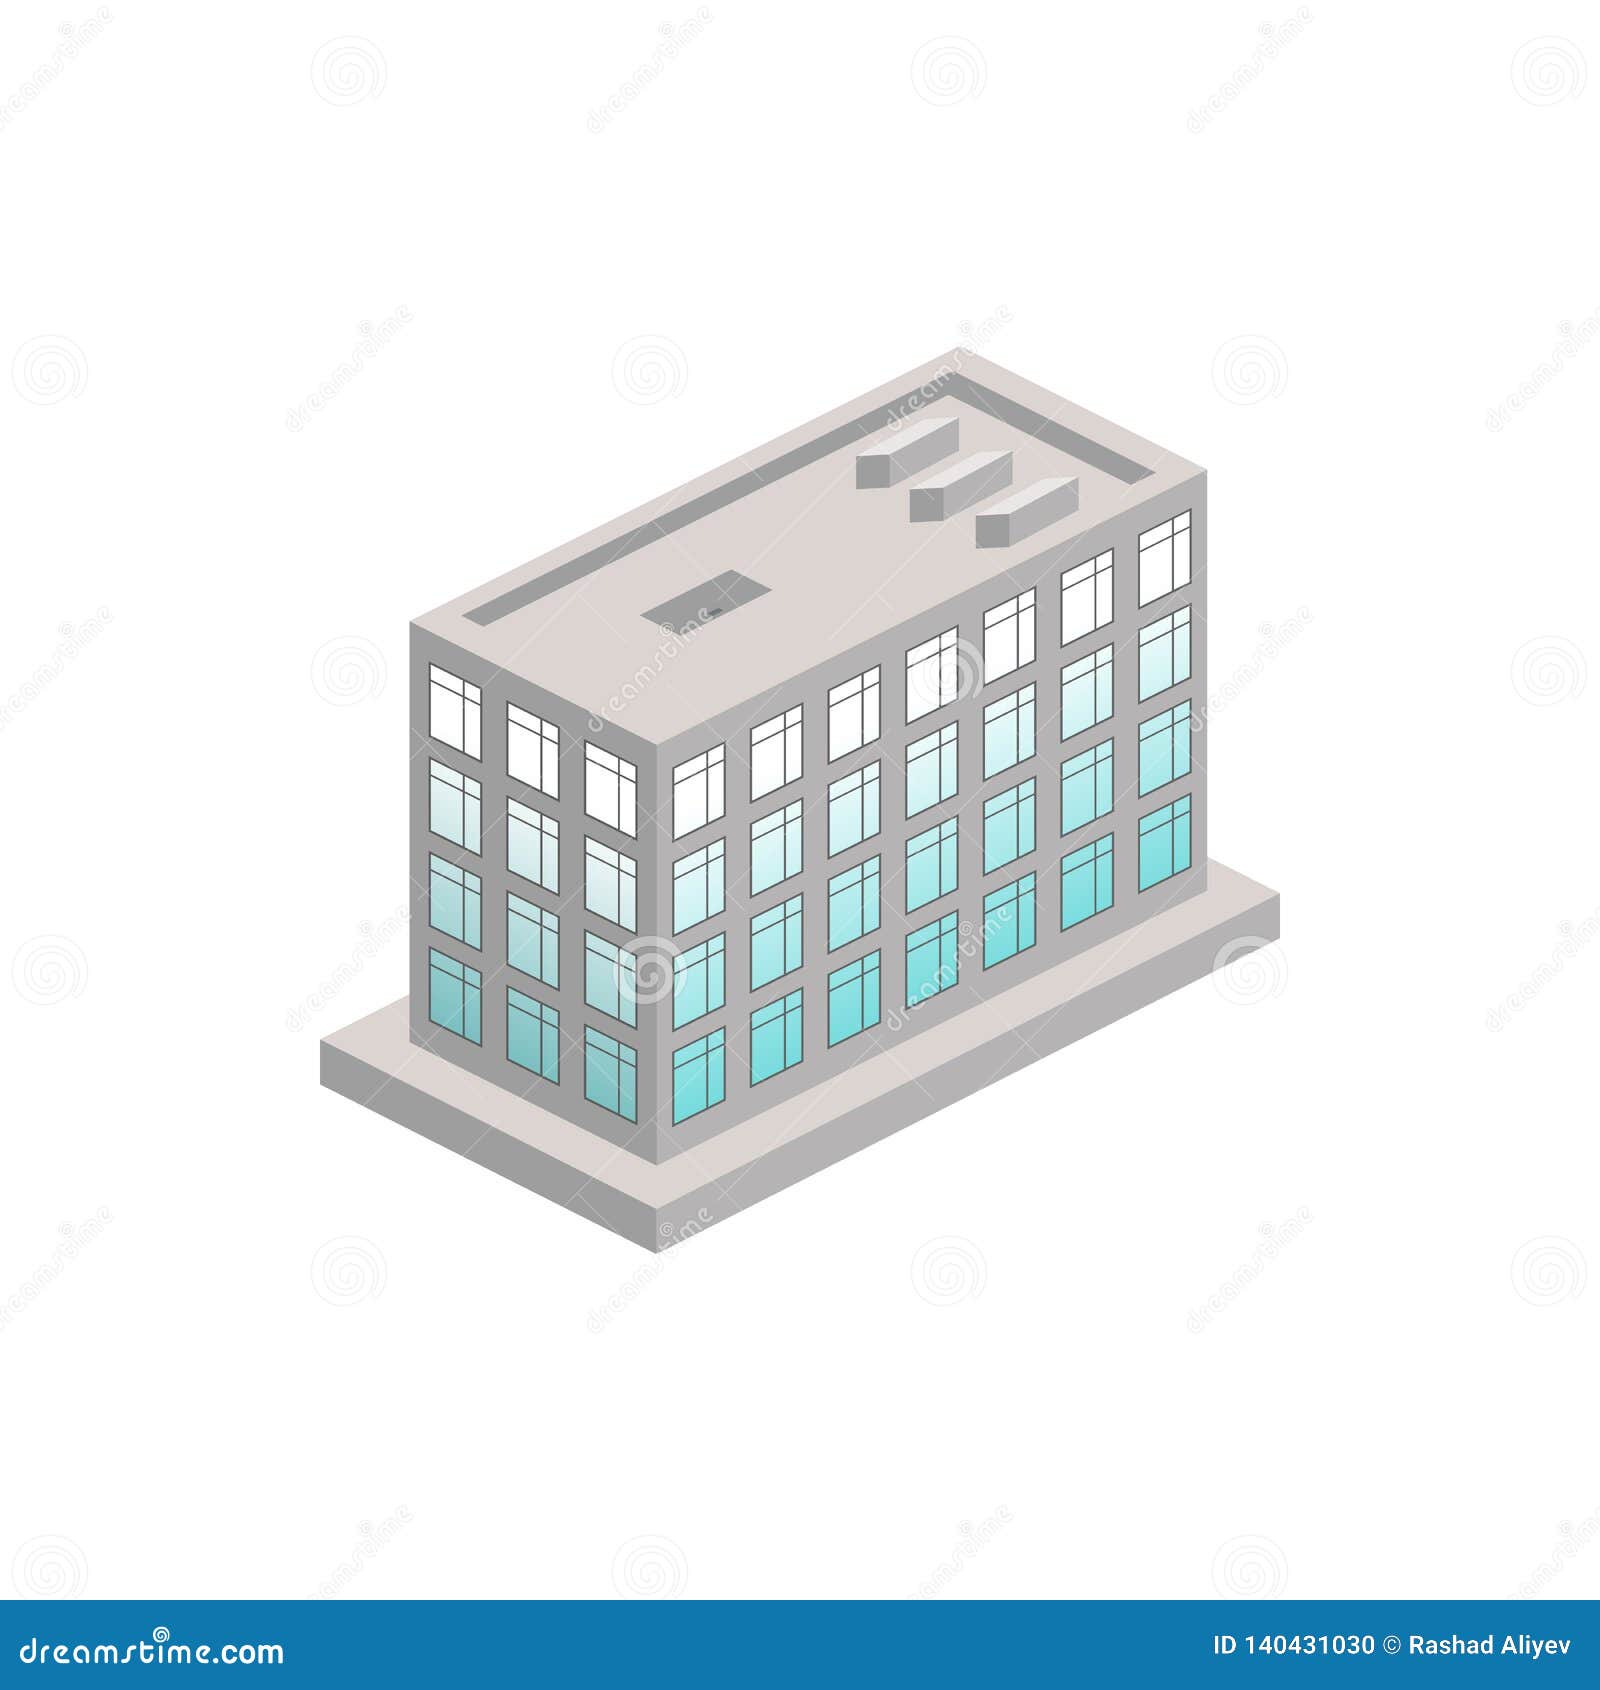 Isometric Office Building. Element of Color Isometric Building. Premium  Quality Graphic Design Icon Stock Illustration - Illustration of interior,  home: 140431030